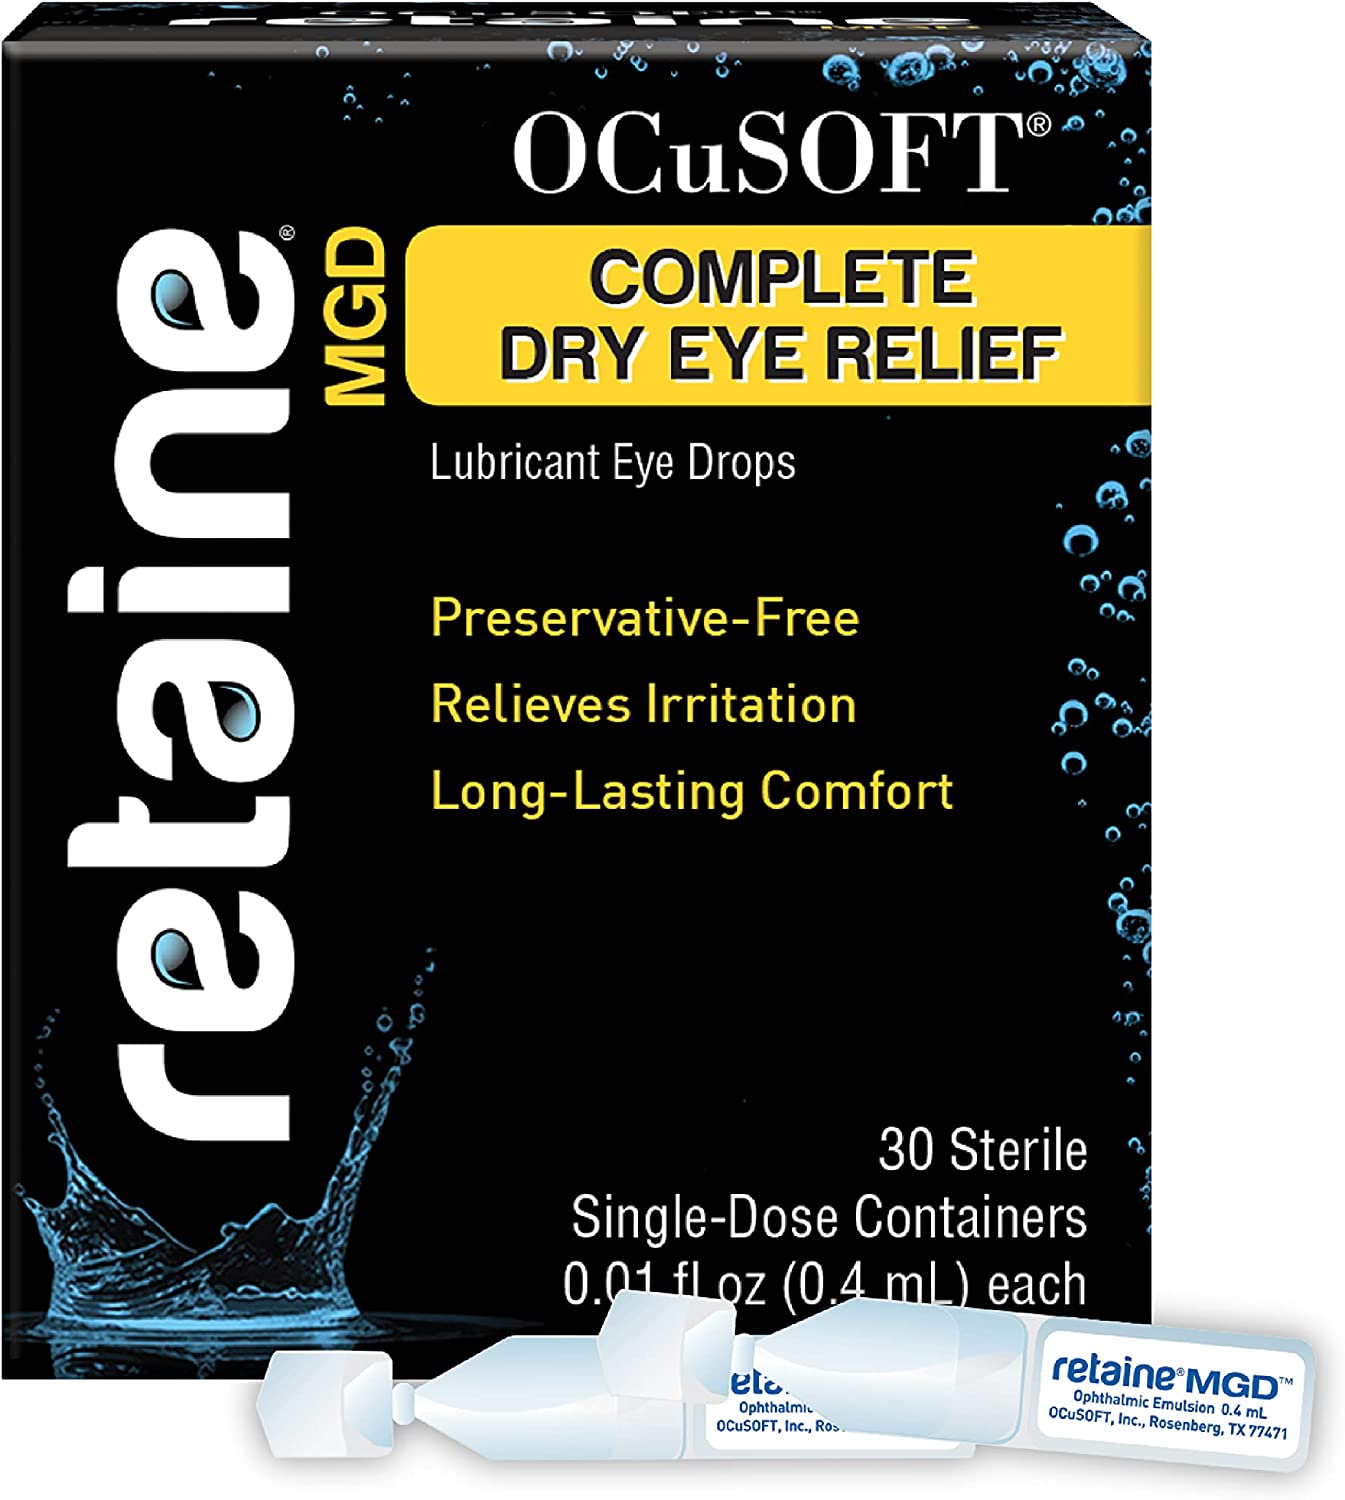 Review of Ocusoft Retaine MGD Ophthalmic Emulsion, Milky White Solution